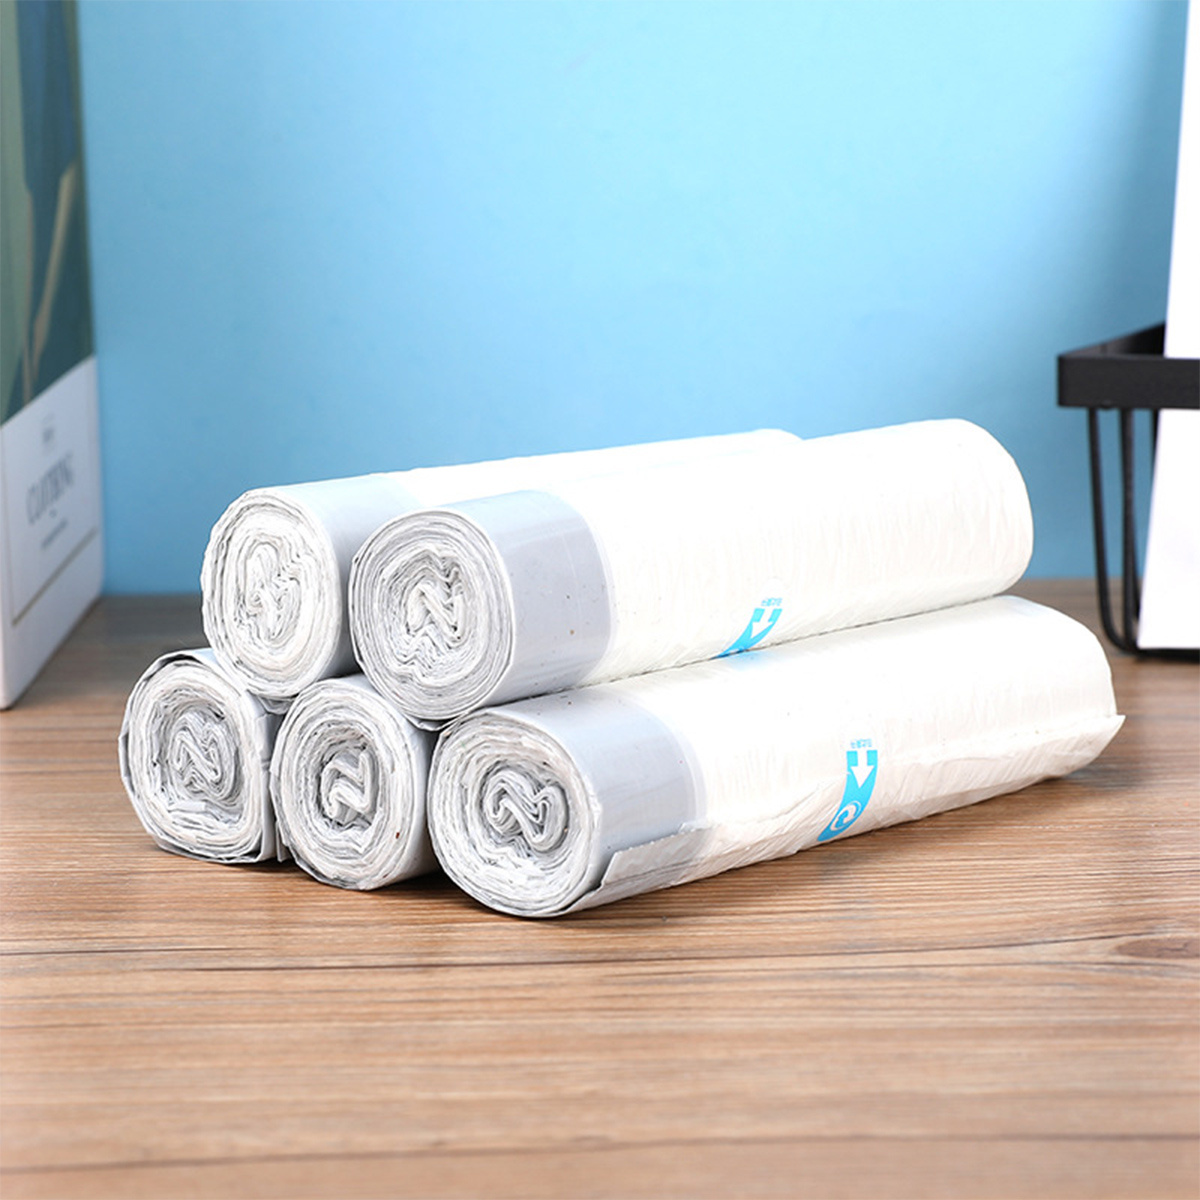 75pcs 5 Rolls/ Pack 4 Gallon Small Trash Bags, Disposable Thin Garbage Bags,  For Kitchen, Bathroom, Bedroom, Office, Small Trash Can